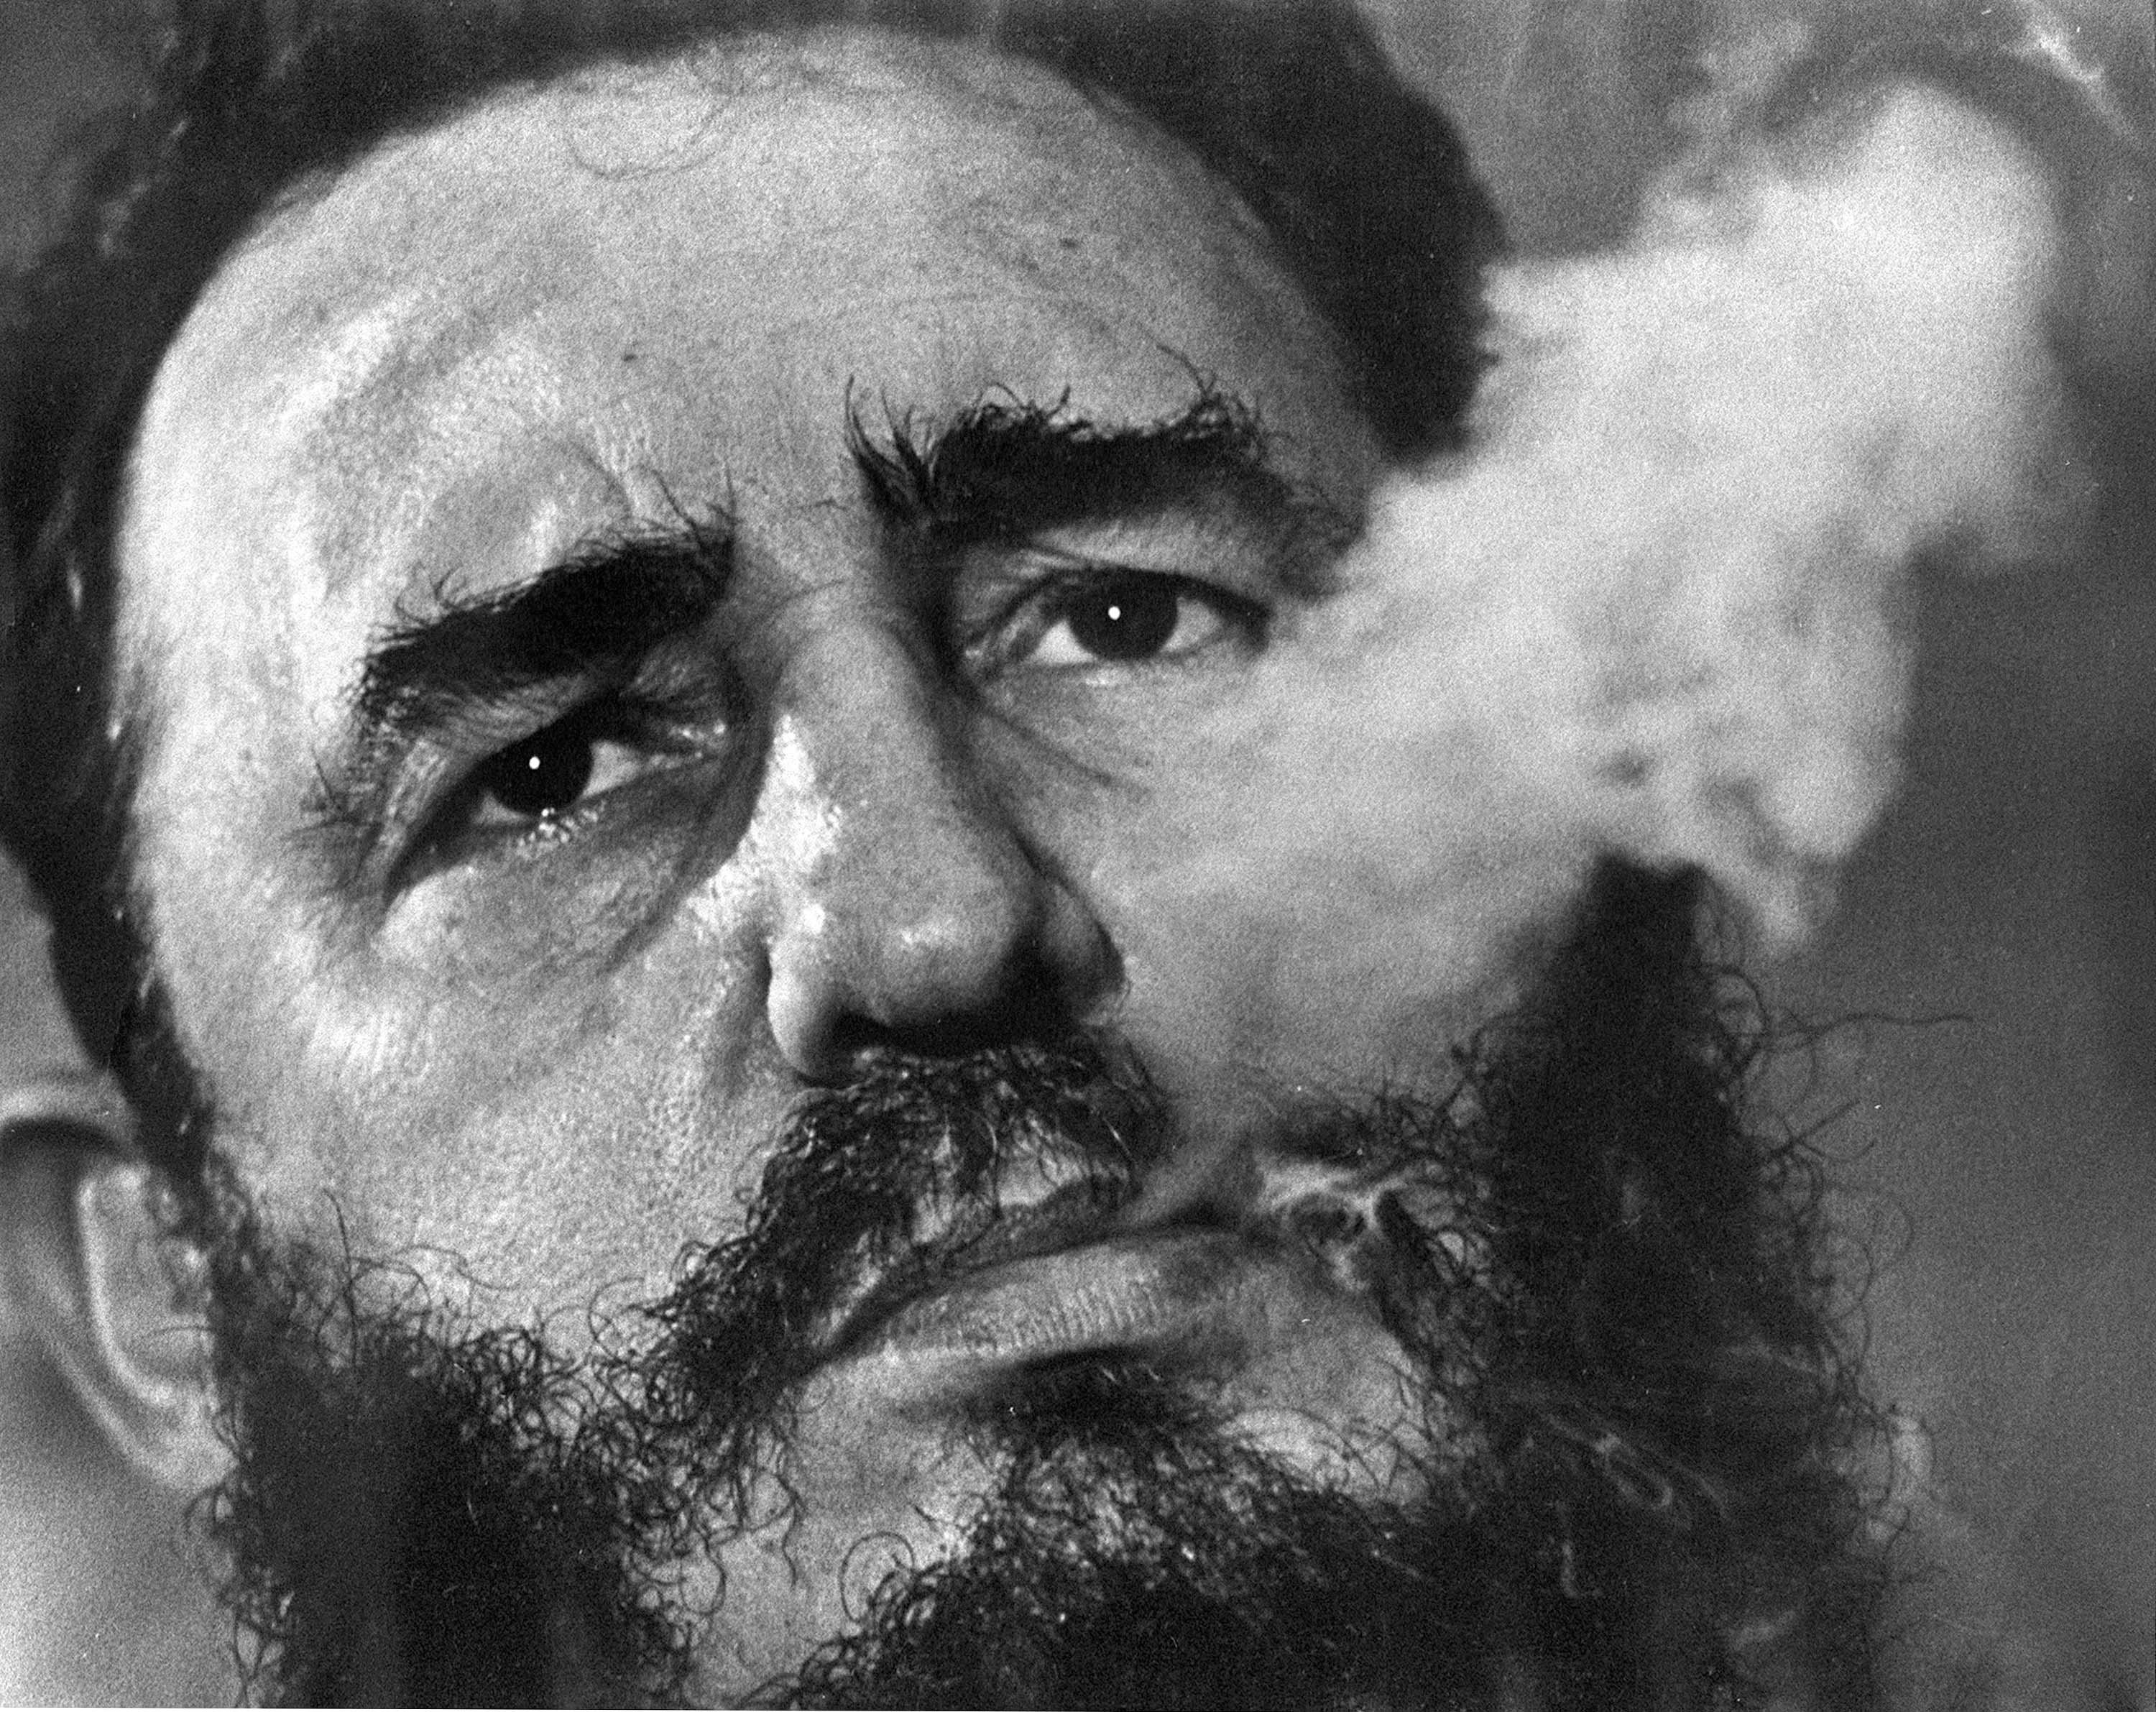 The position of prime minister was held by Fidel Castro from 1959 to 1976, when a new constitution changed his title to president and eliminated the post of prime minister. File photo: AP